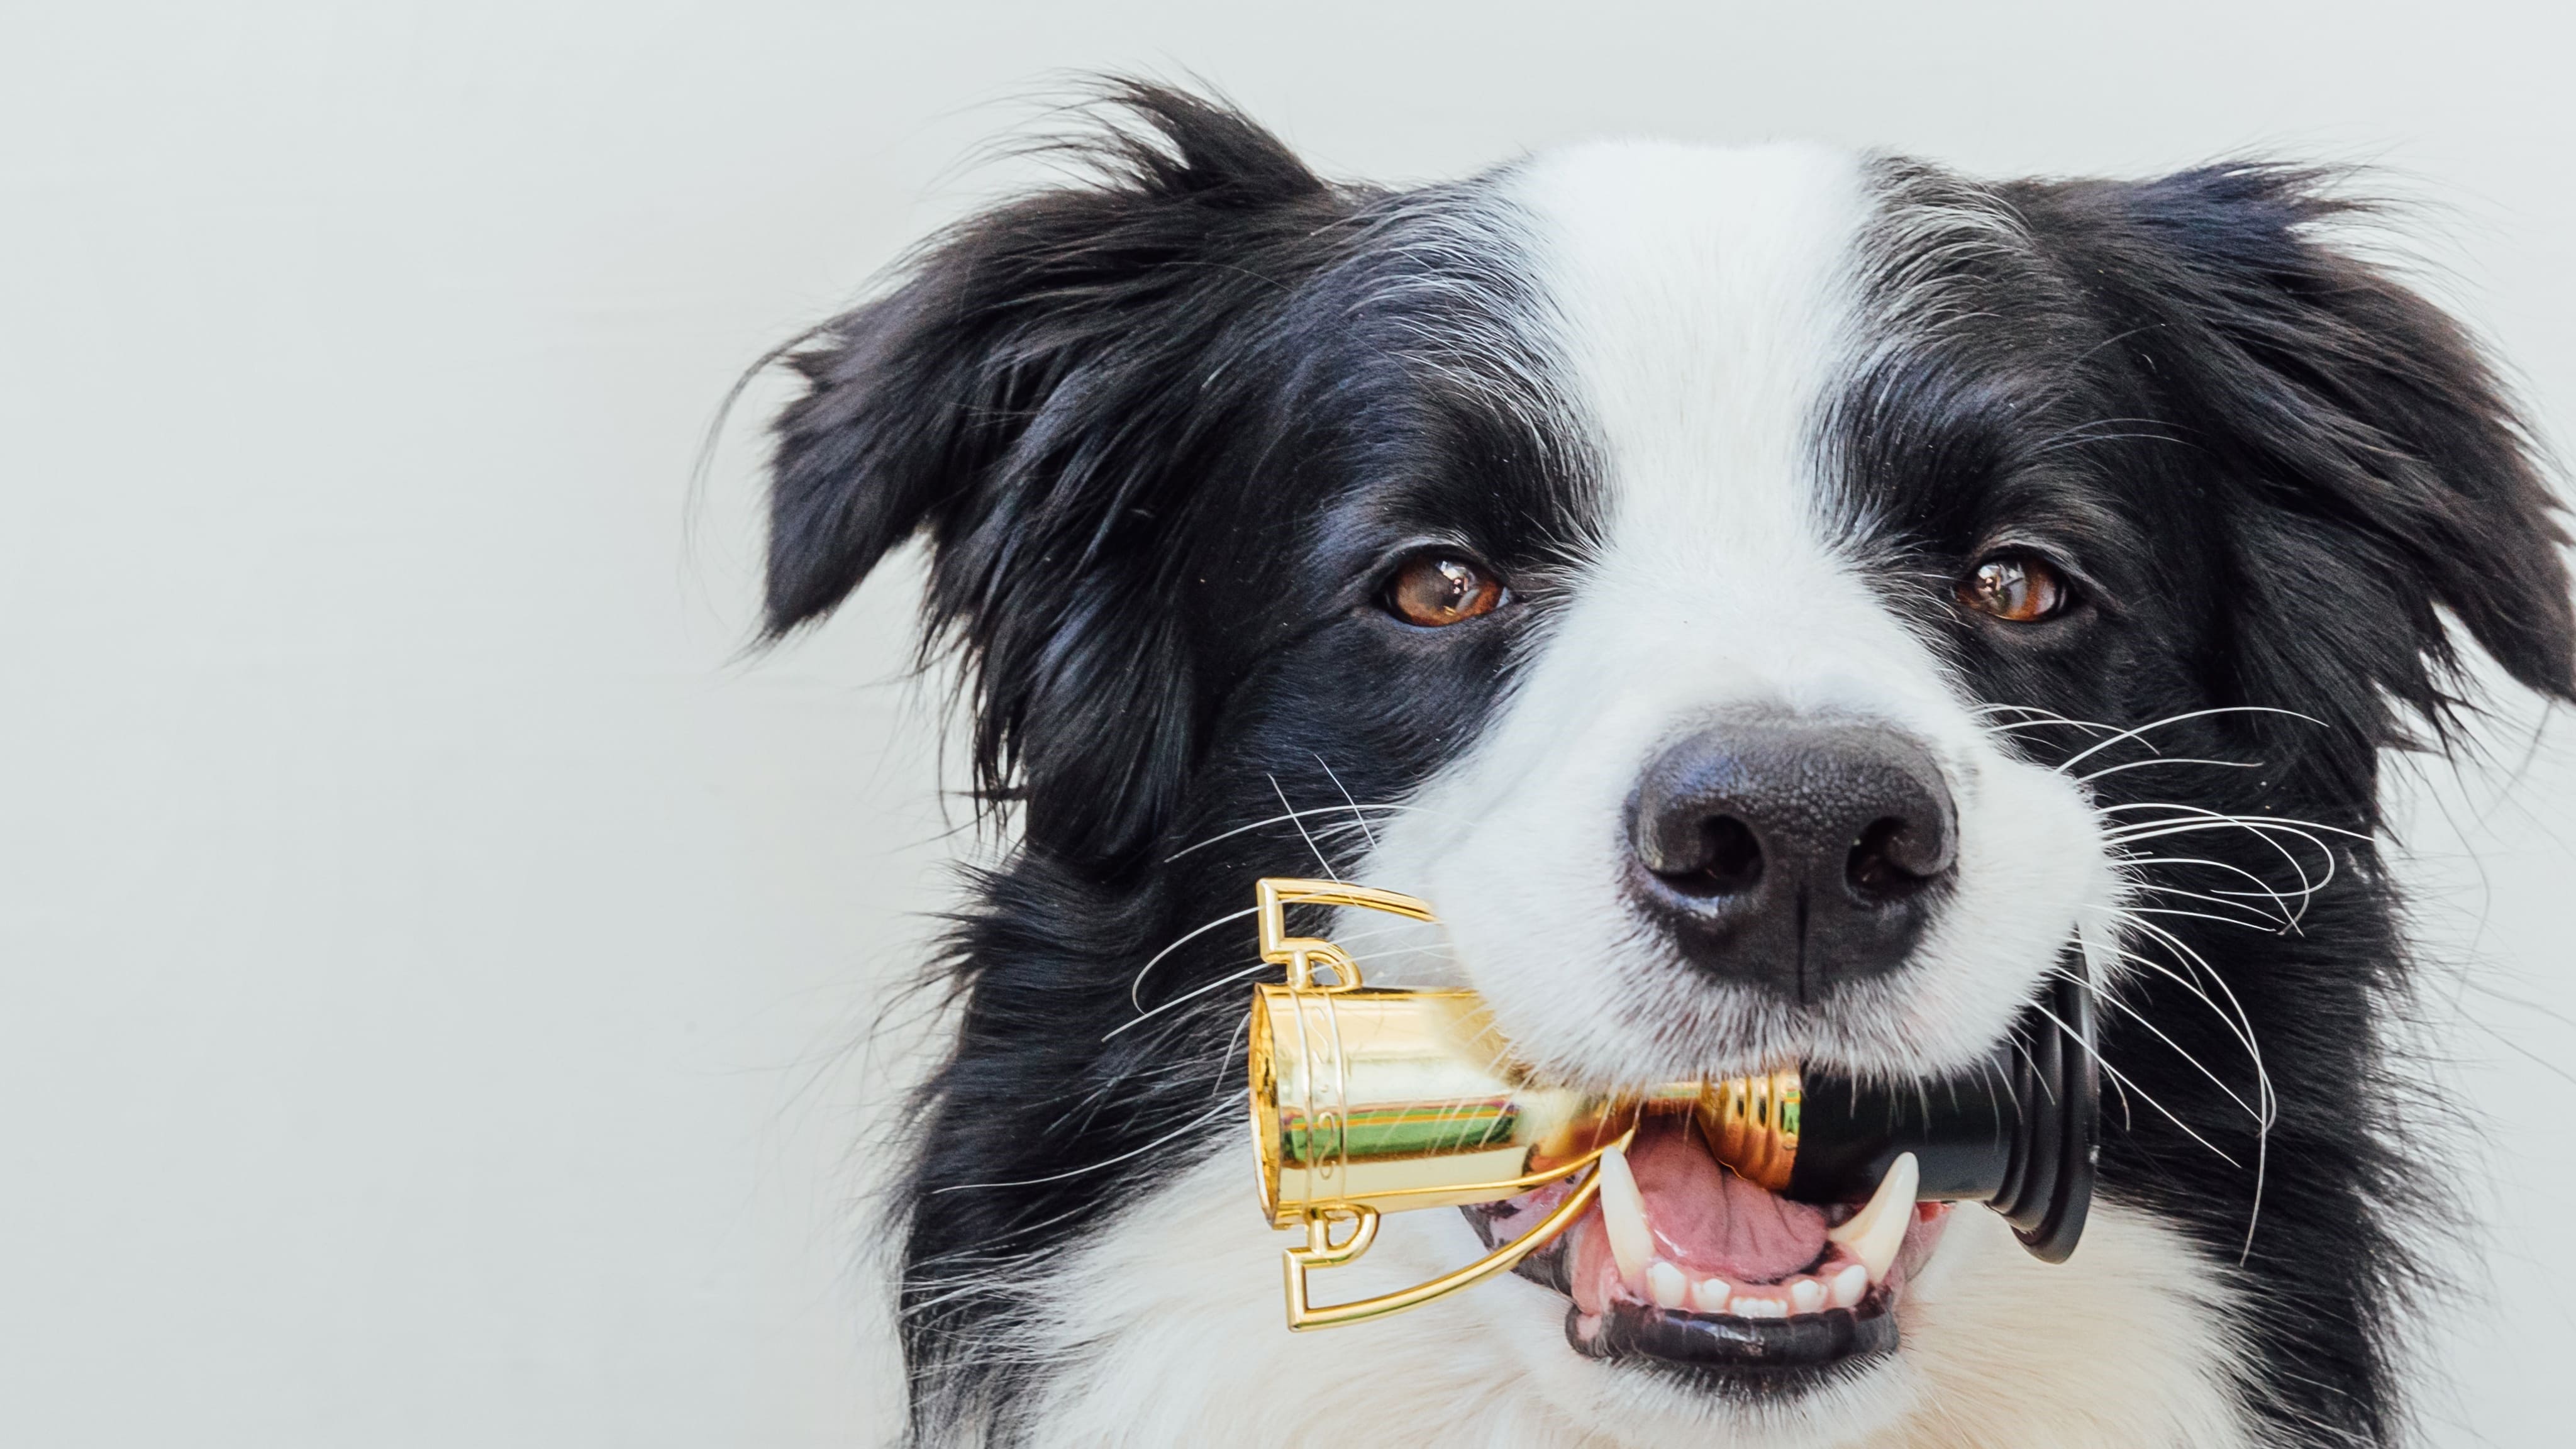 Black and white fluffy dog holding a trophy in his mouth